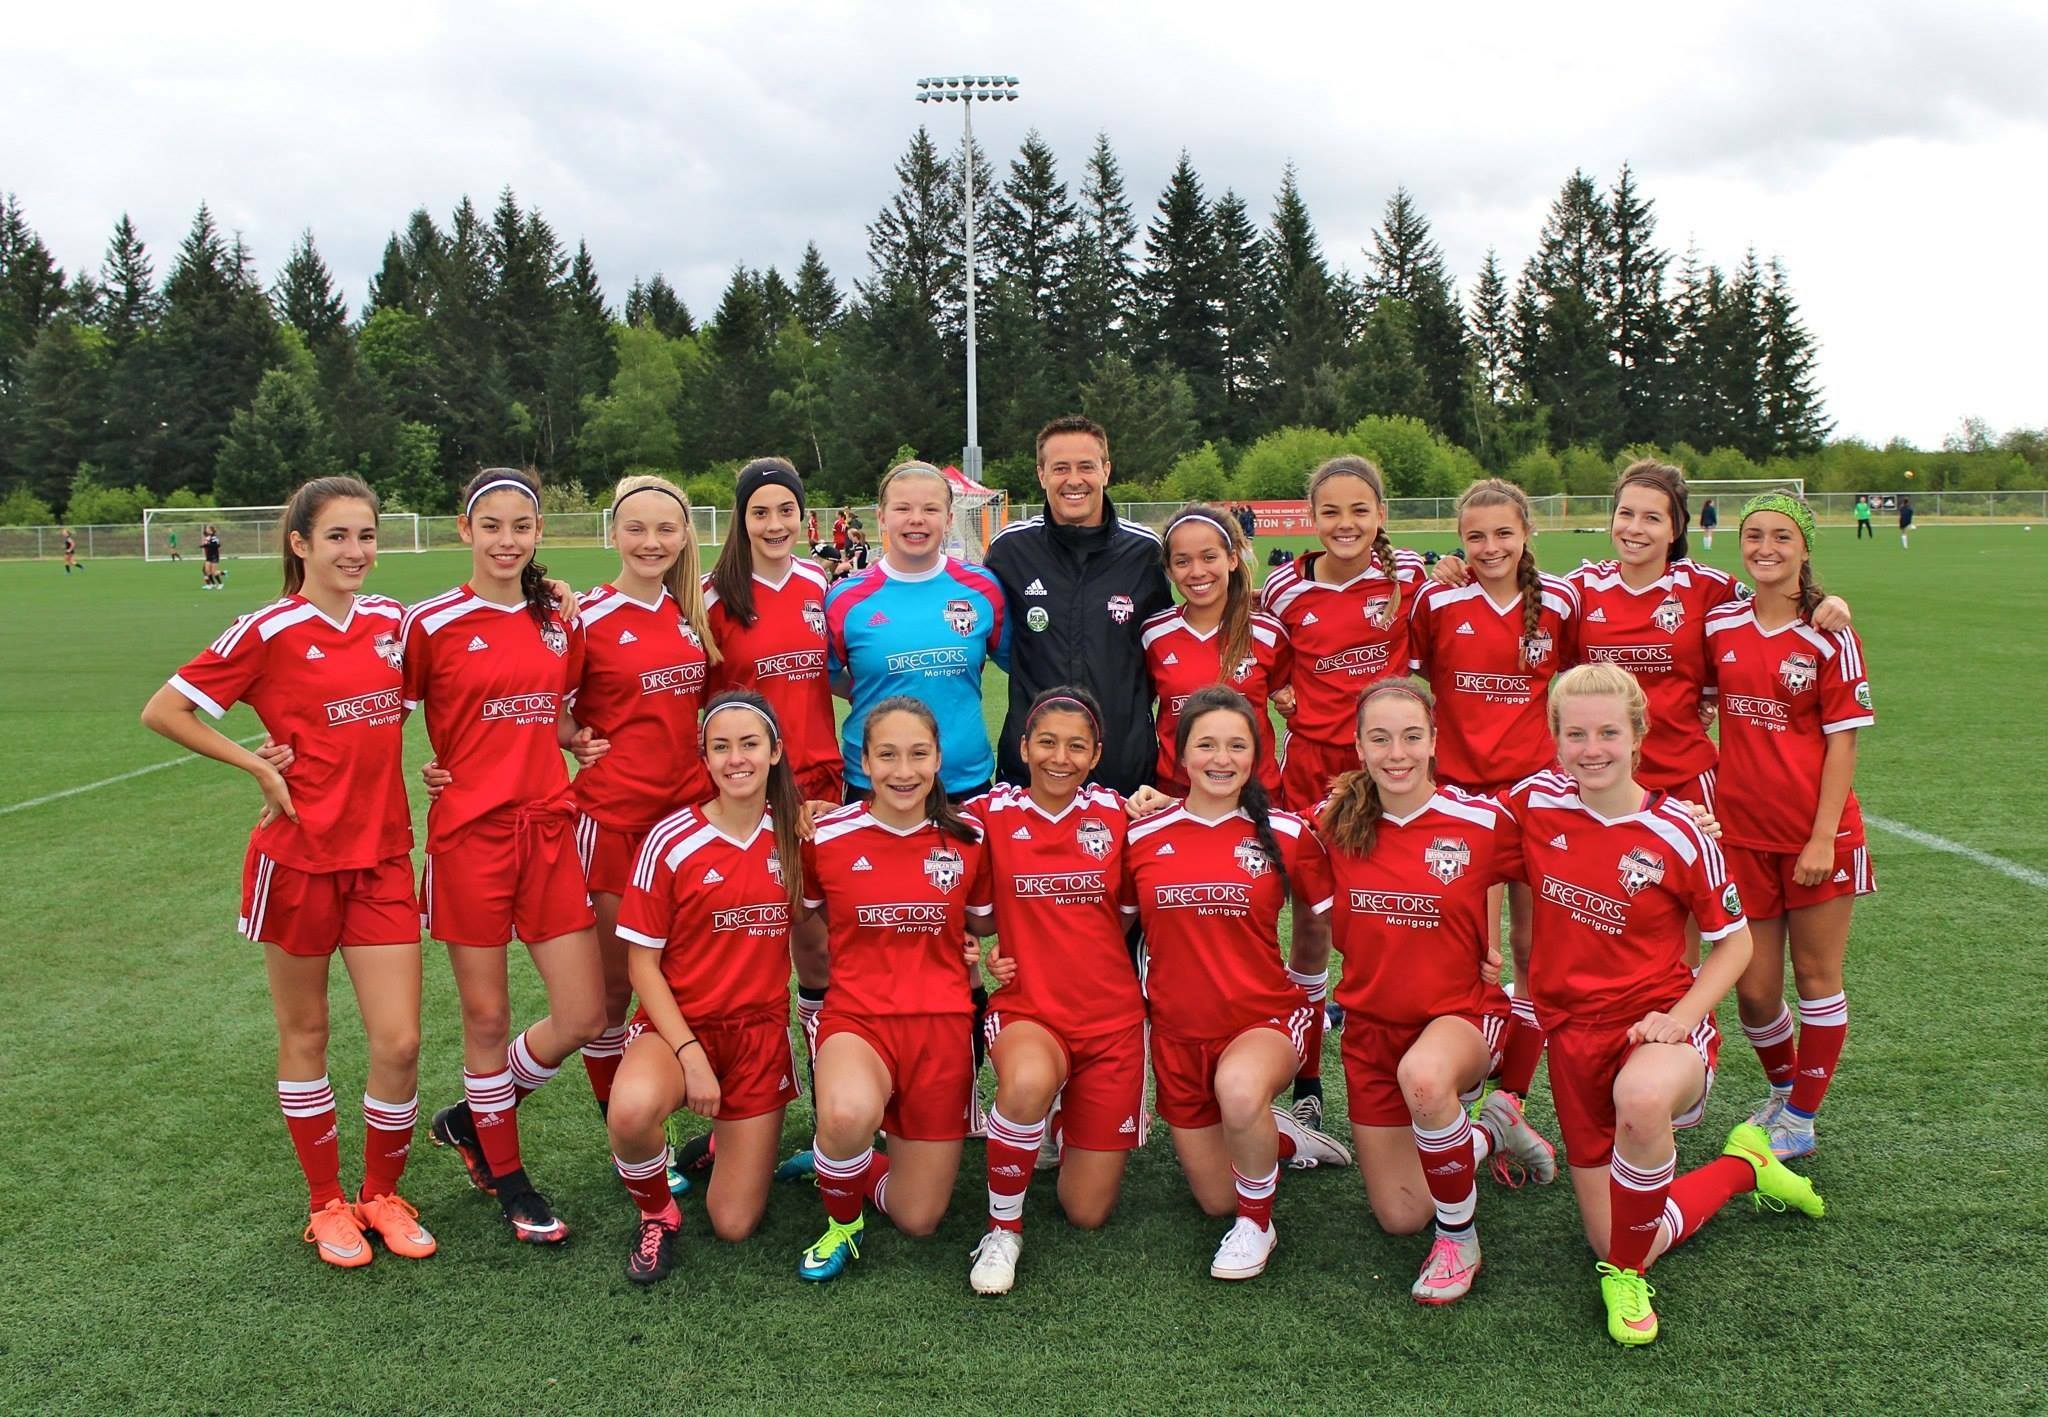 Washington Timbers Red (2001) won the Oregon state championship and a berth in the under-14 girls U.S. Youth Soccer Far West Regionals.